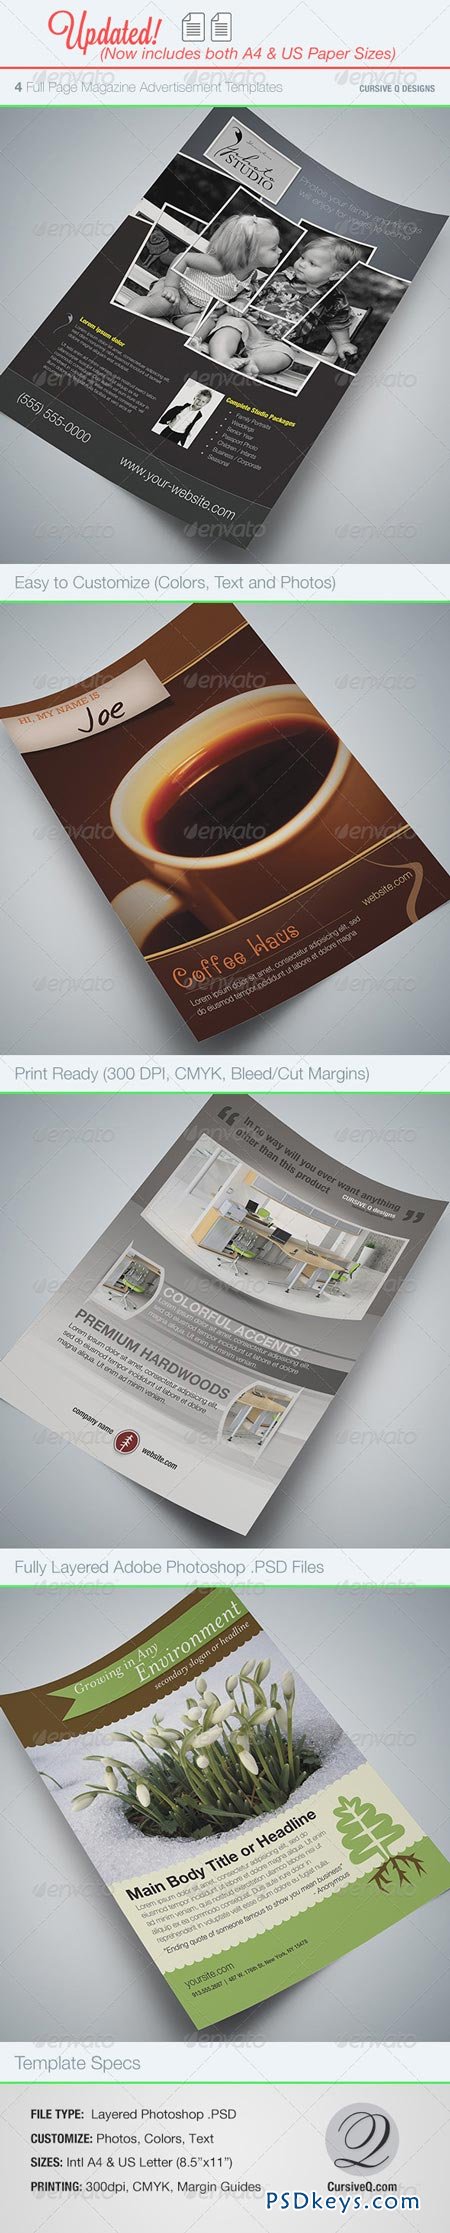 Full Page Magazine Ad or Flyer Templates 76133